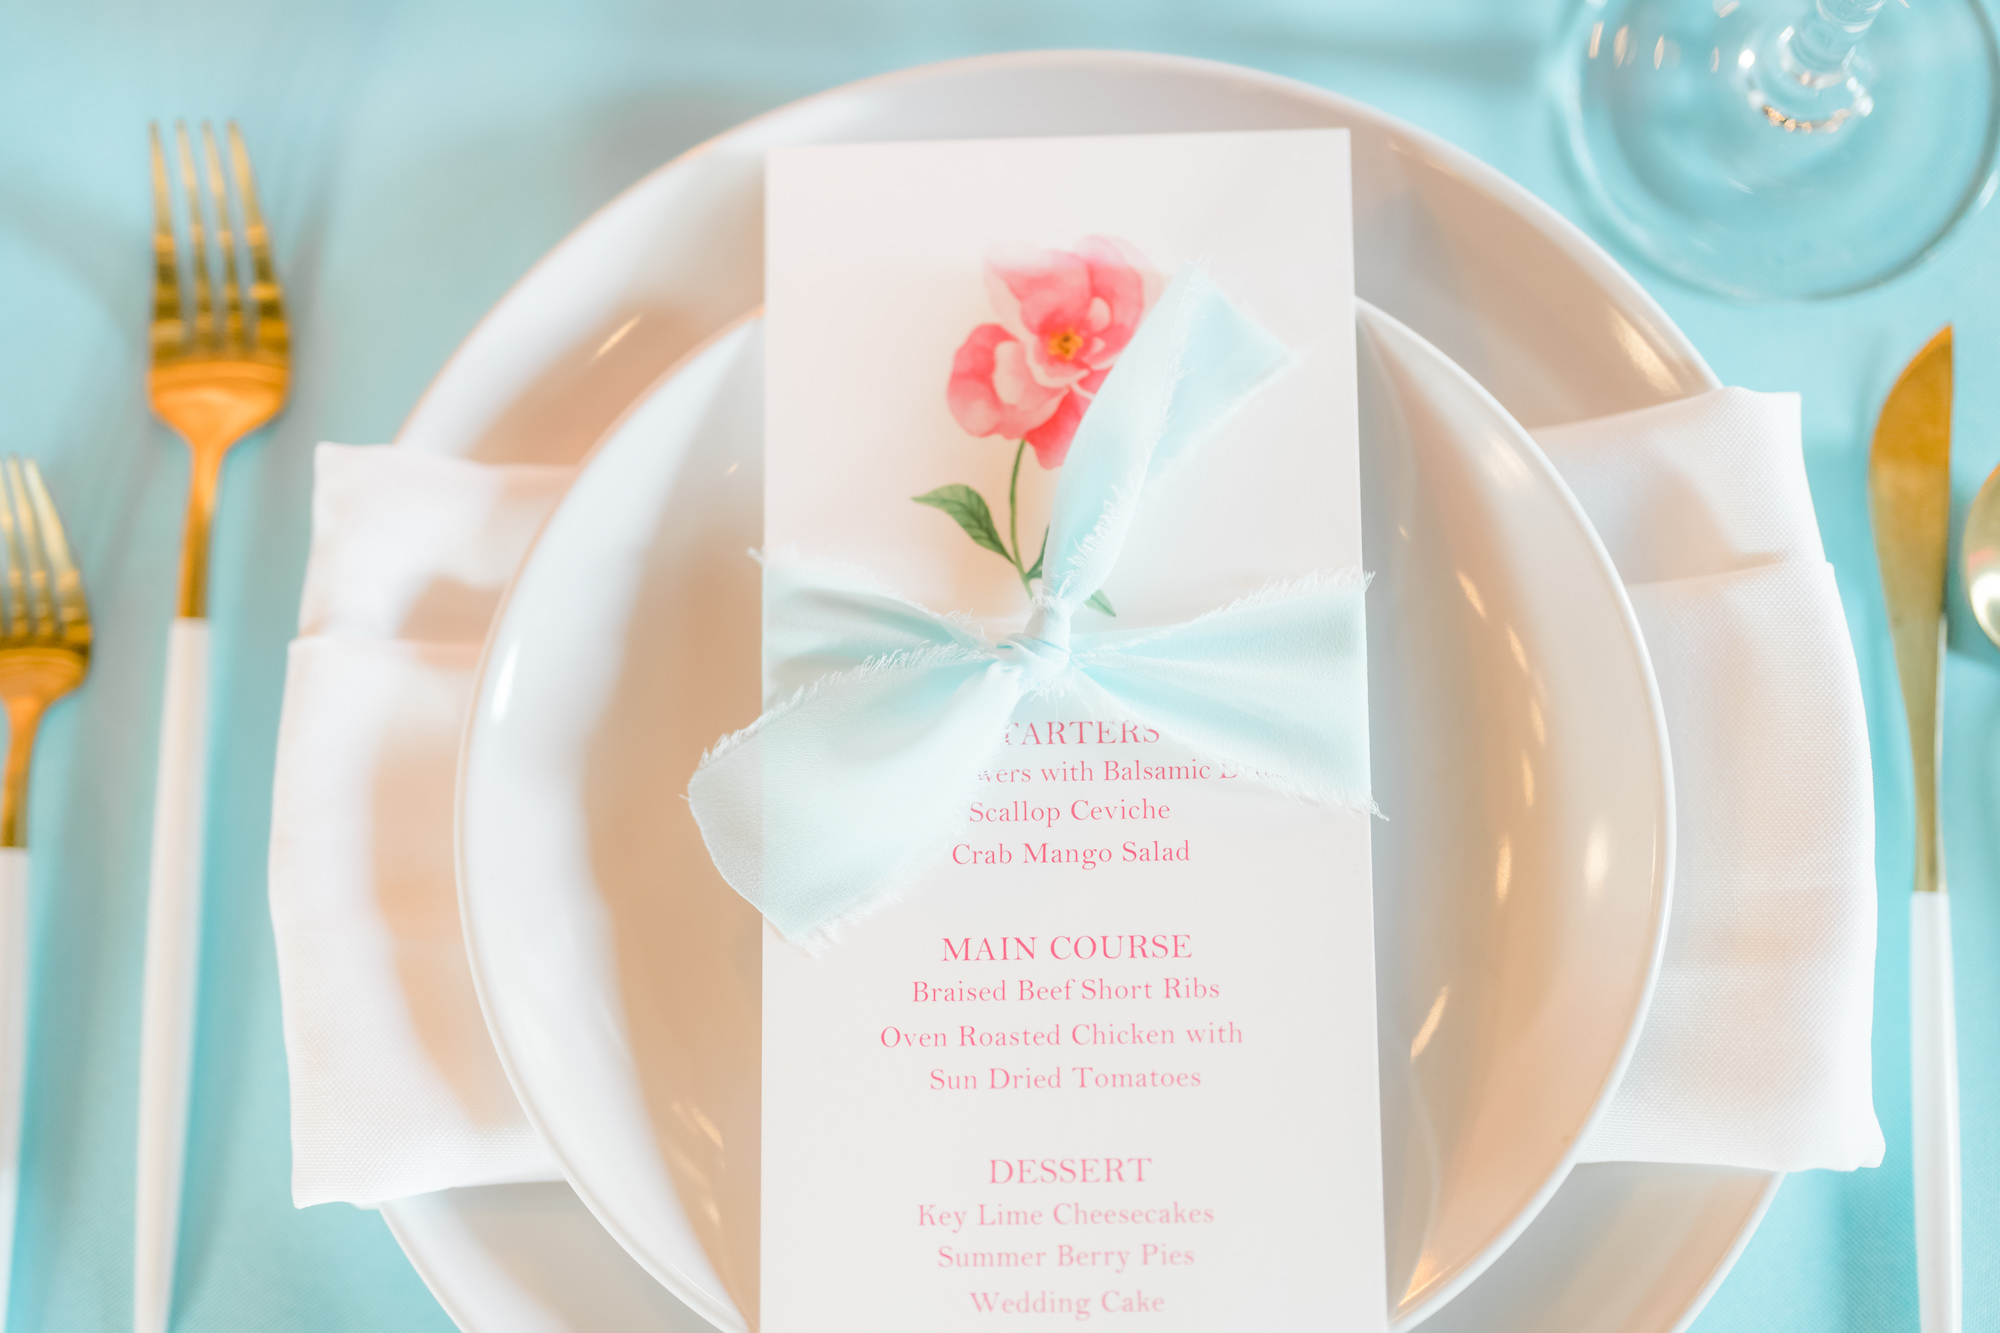 Whimsical Wedding Reception Decor, White China Plates, White and Floral Menu, Pink Candlestick, Gold and White Candlestick | Tampa Bay Wedding Rentals Gabro Event Services | Wedding Stationery Sadgebrush Designs